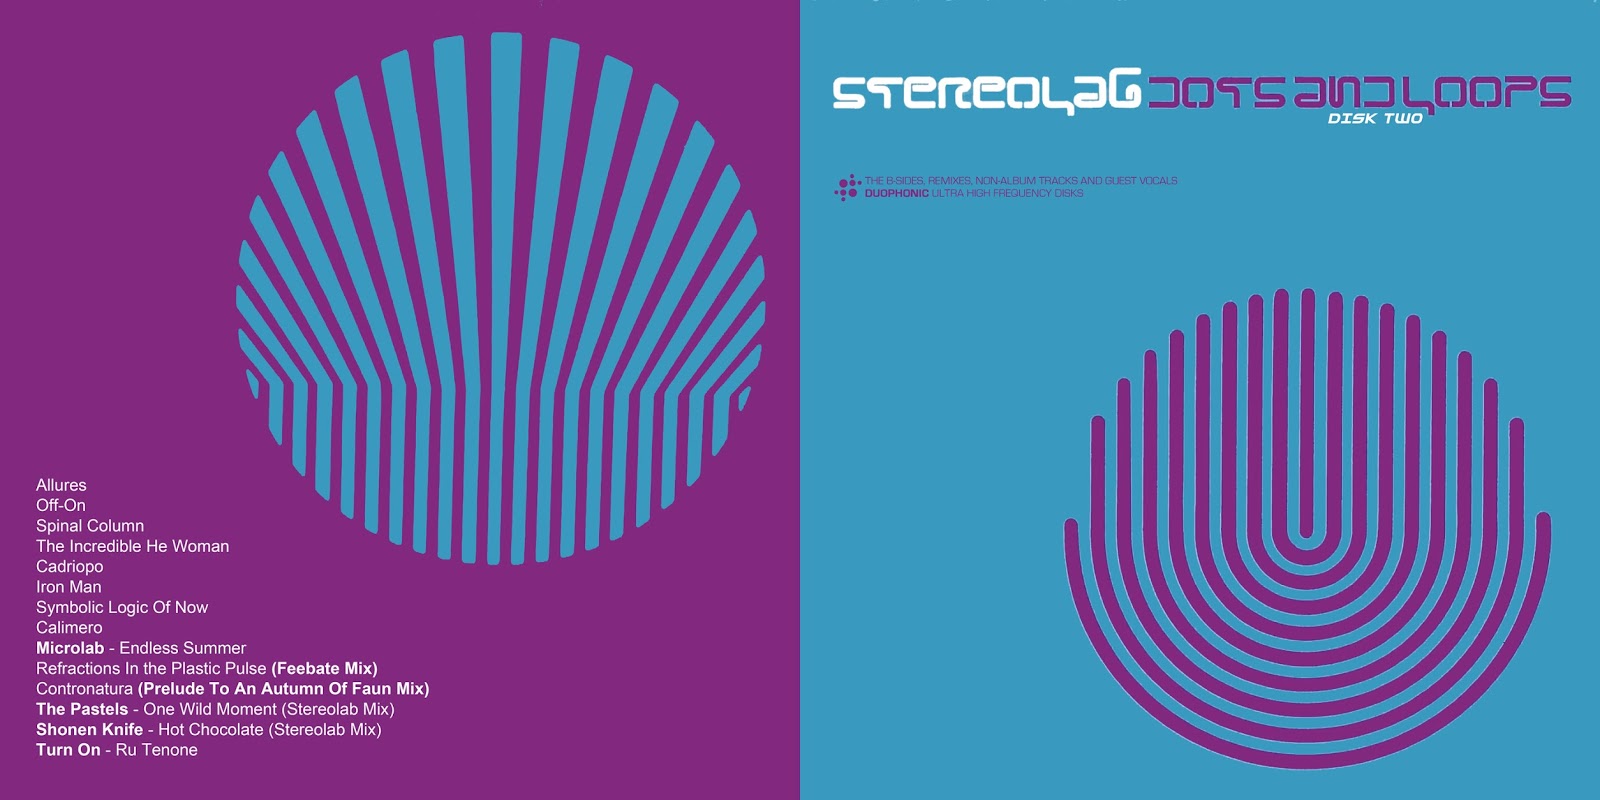 Slide sonoridade melódica dj shadow zn. Dot loop. Stereolab 700. Stereolab Switched on. Stereolab household names.